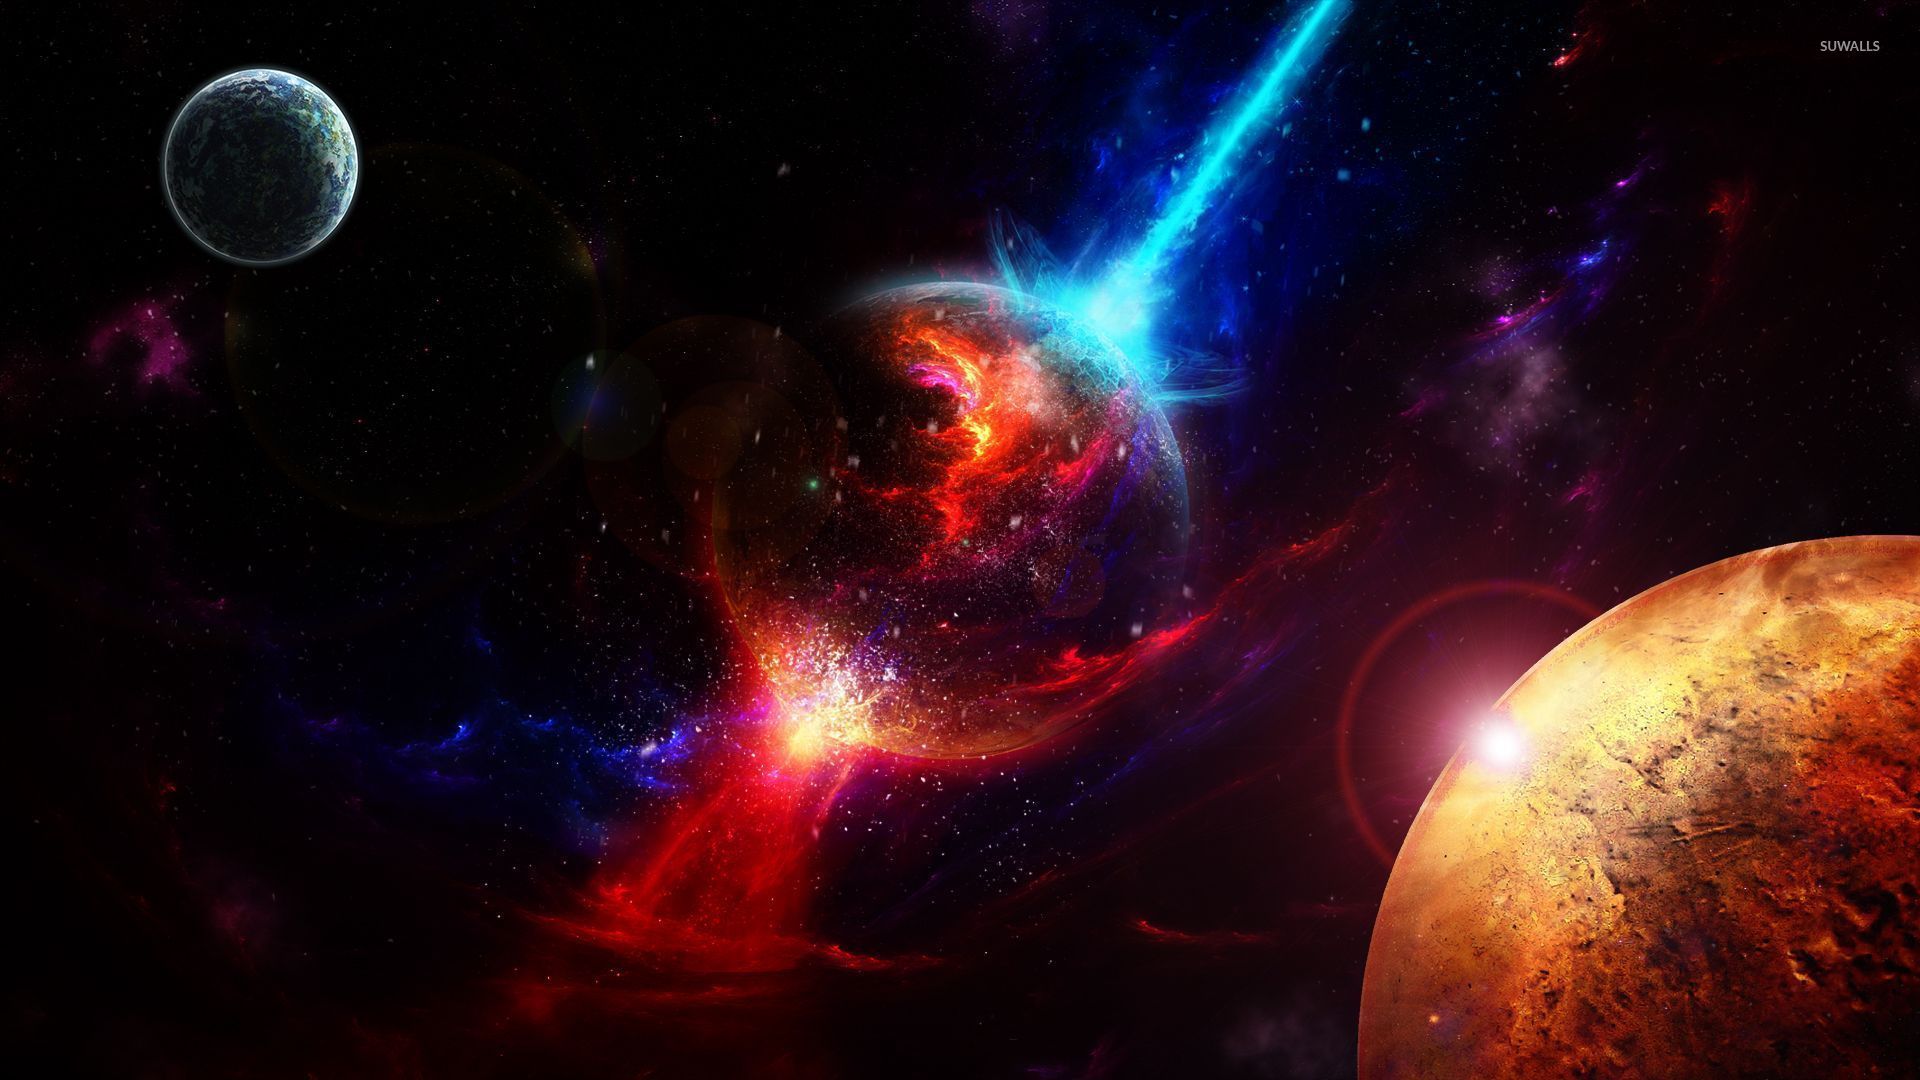 Cool Space Galaxy Wallpapers